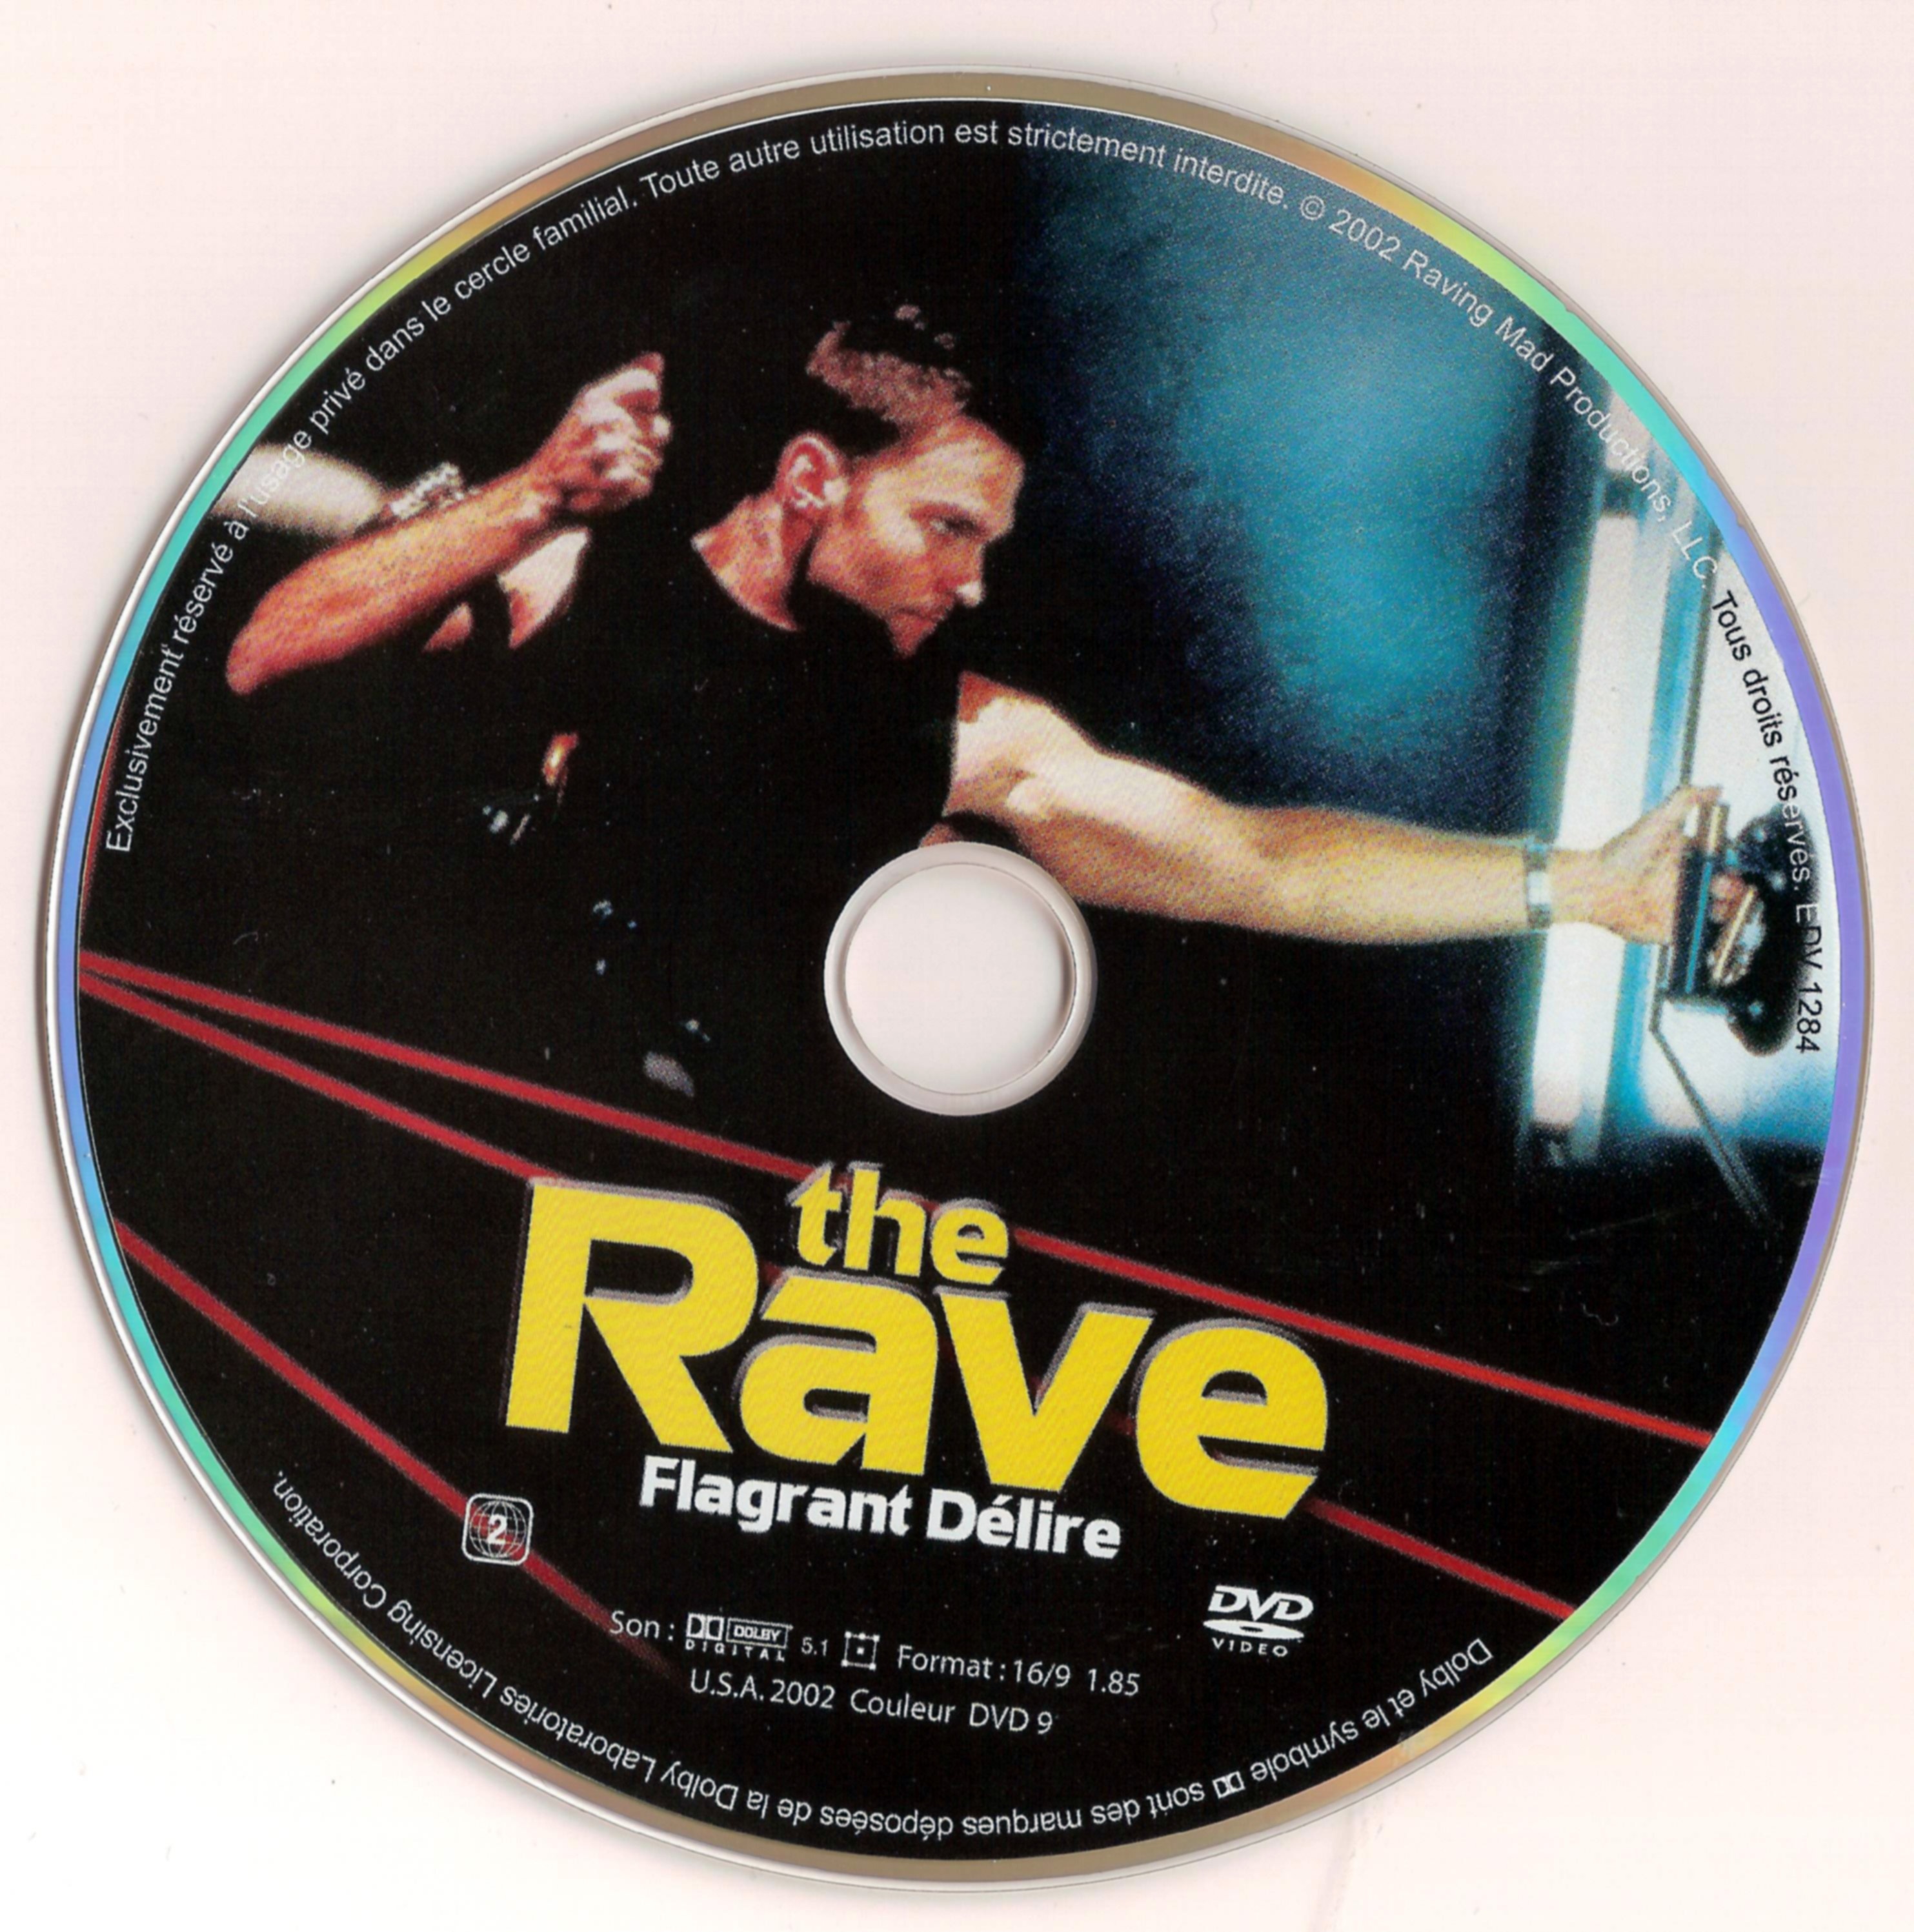 The rave